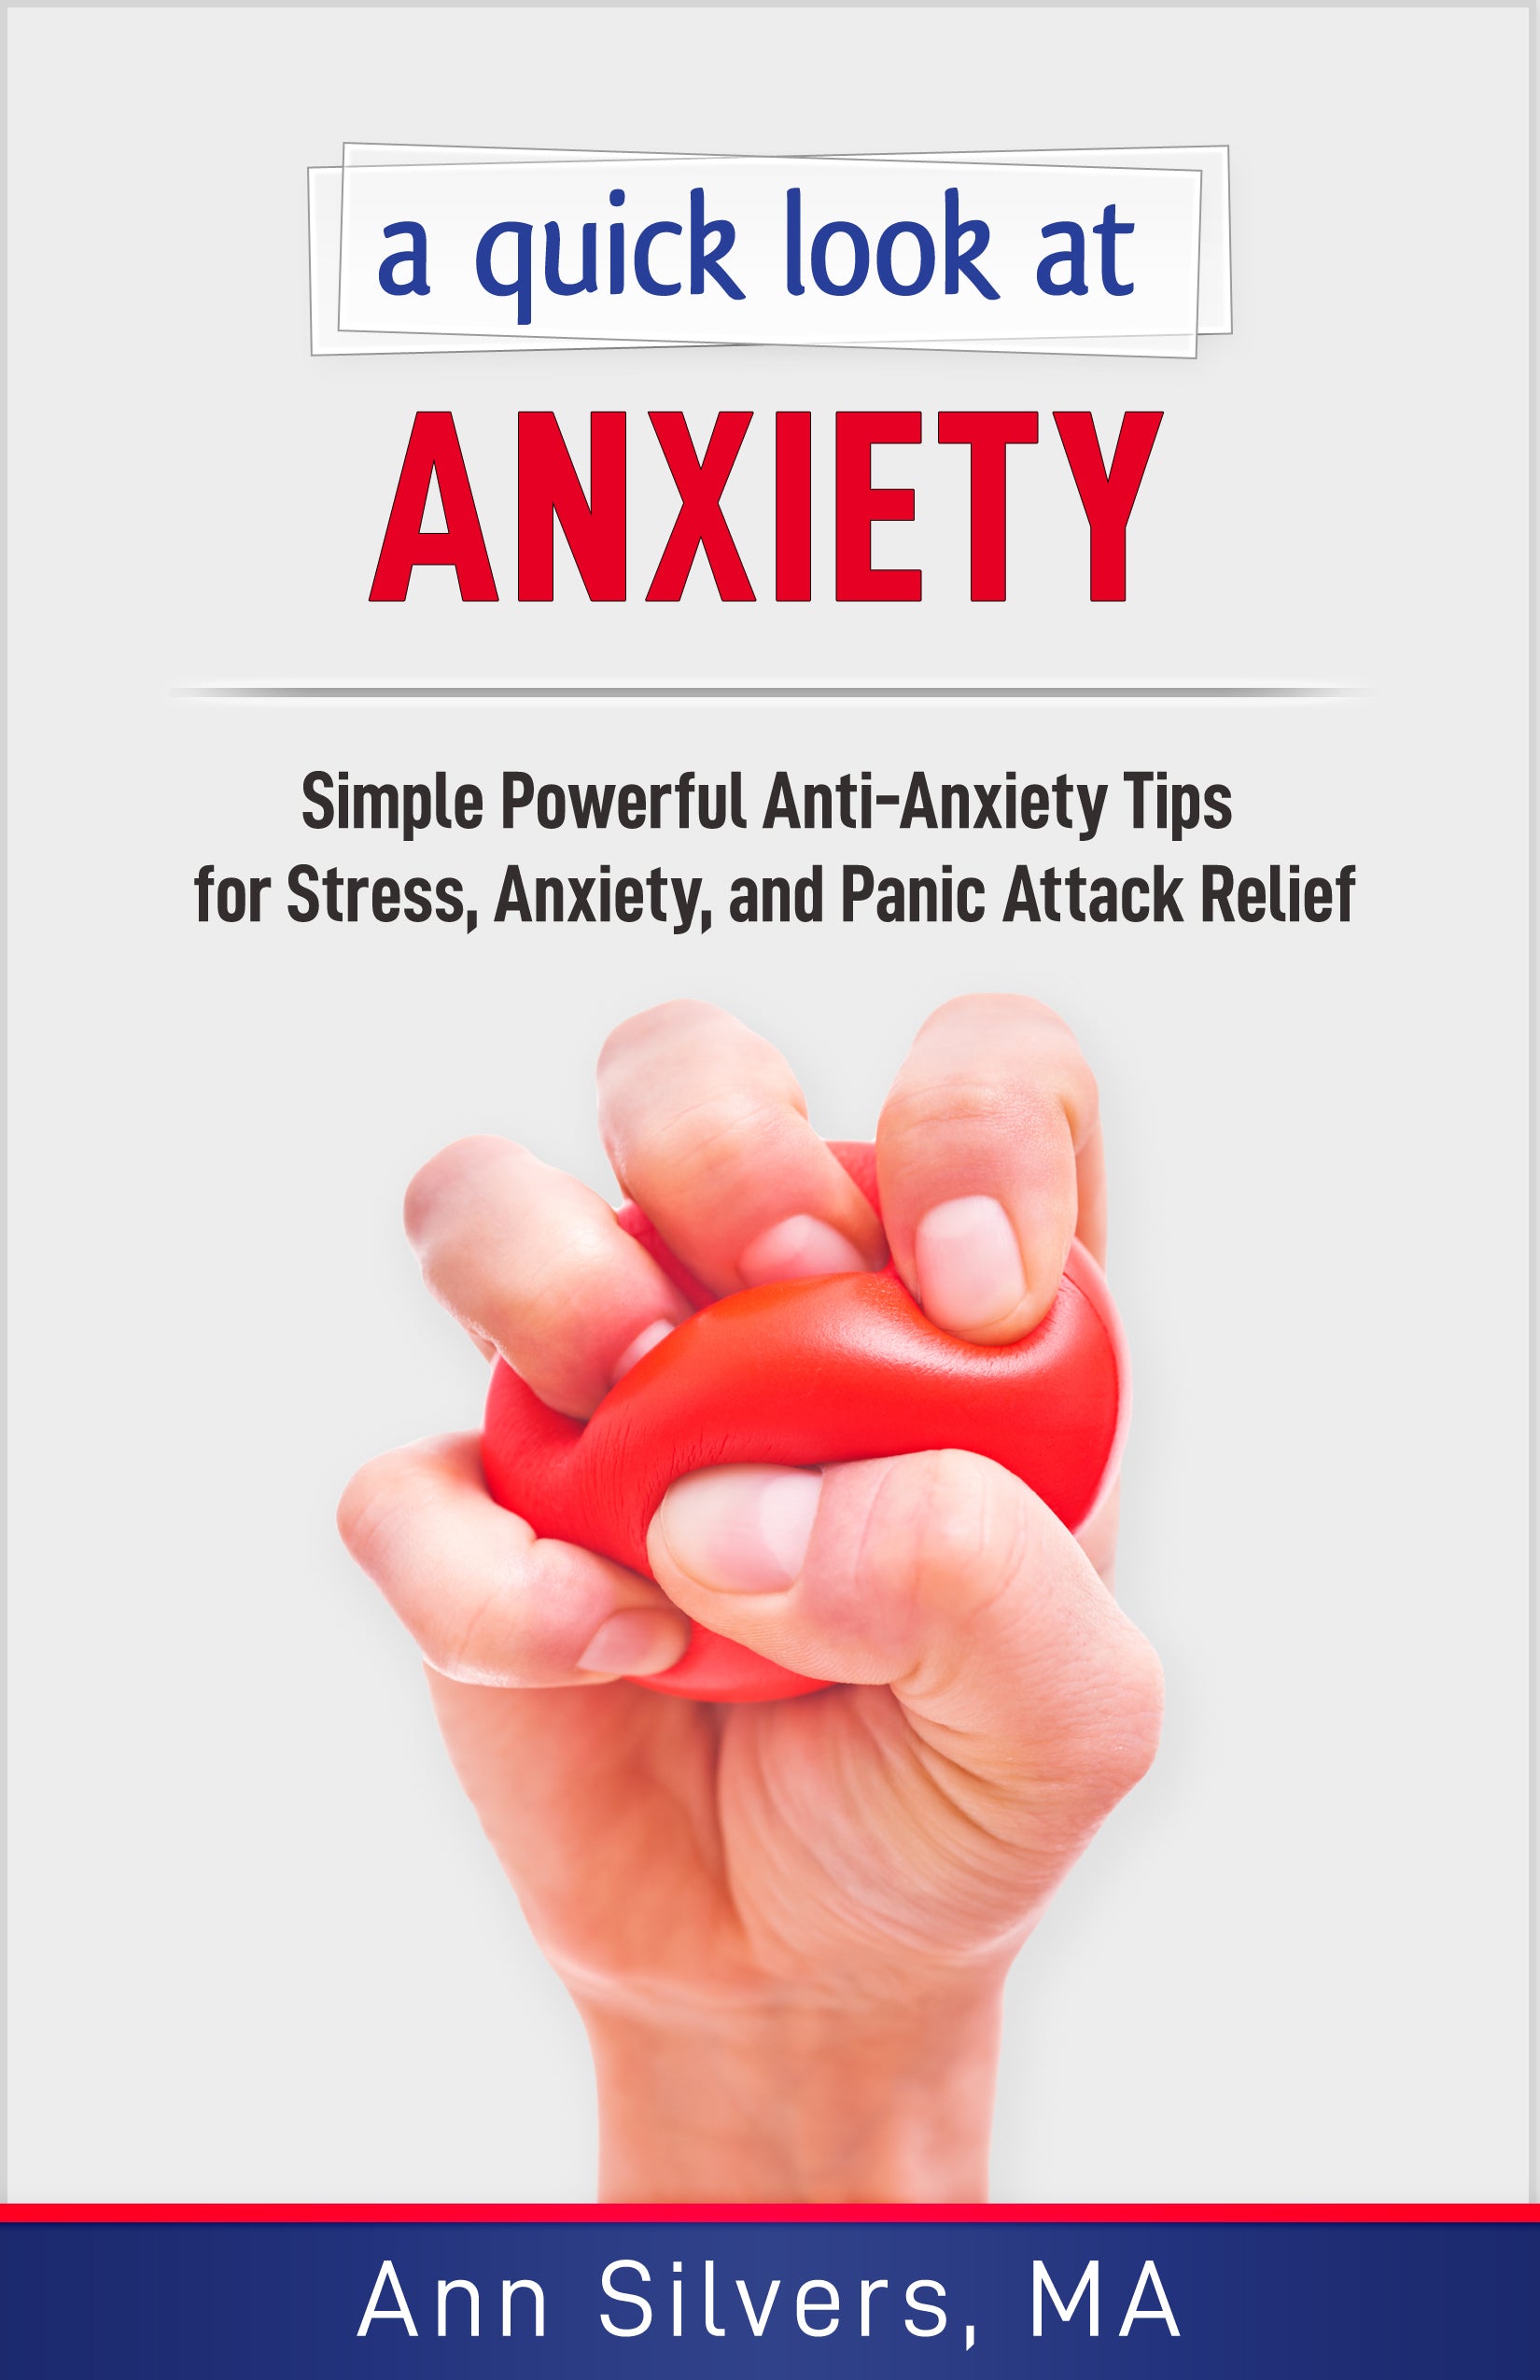 A quick look at Anxiety: Simple Powerful Anti-Anxiety Tips for Stress, Anxiety, and Panic Attack Relief